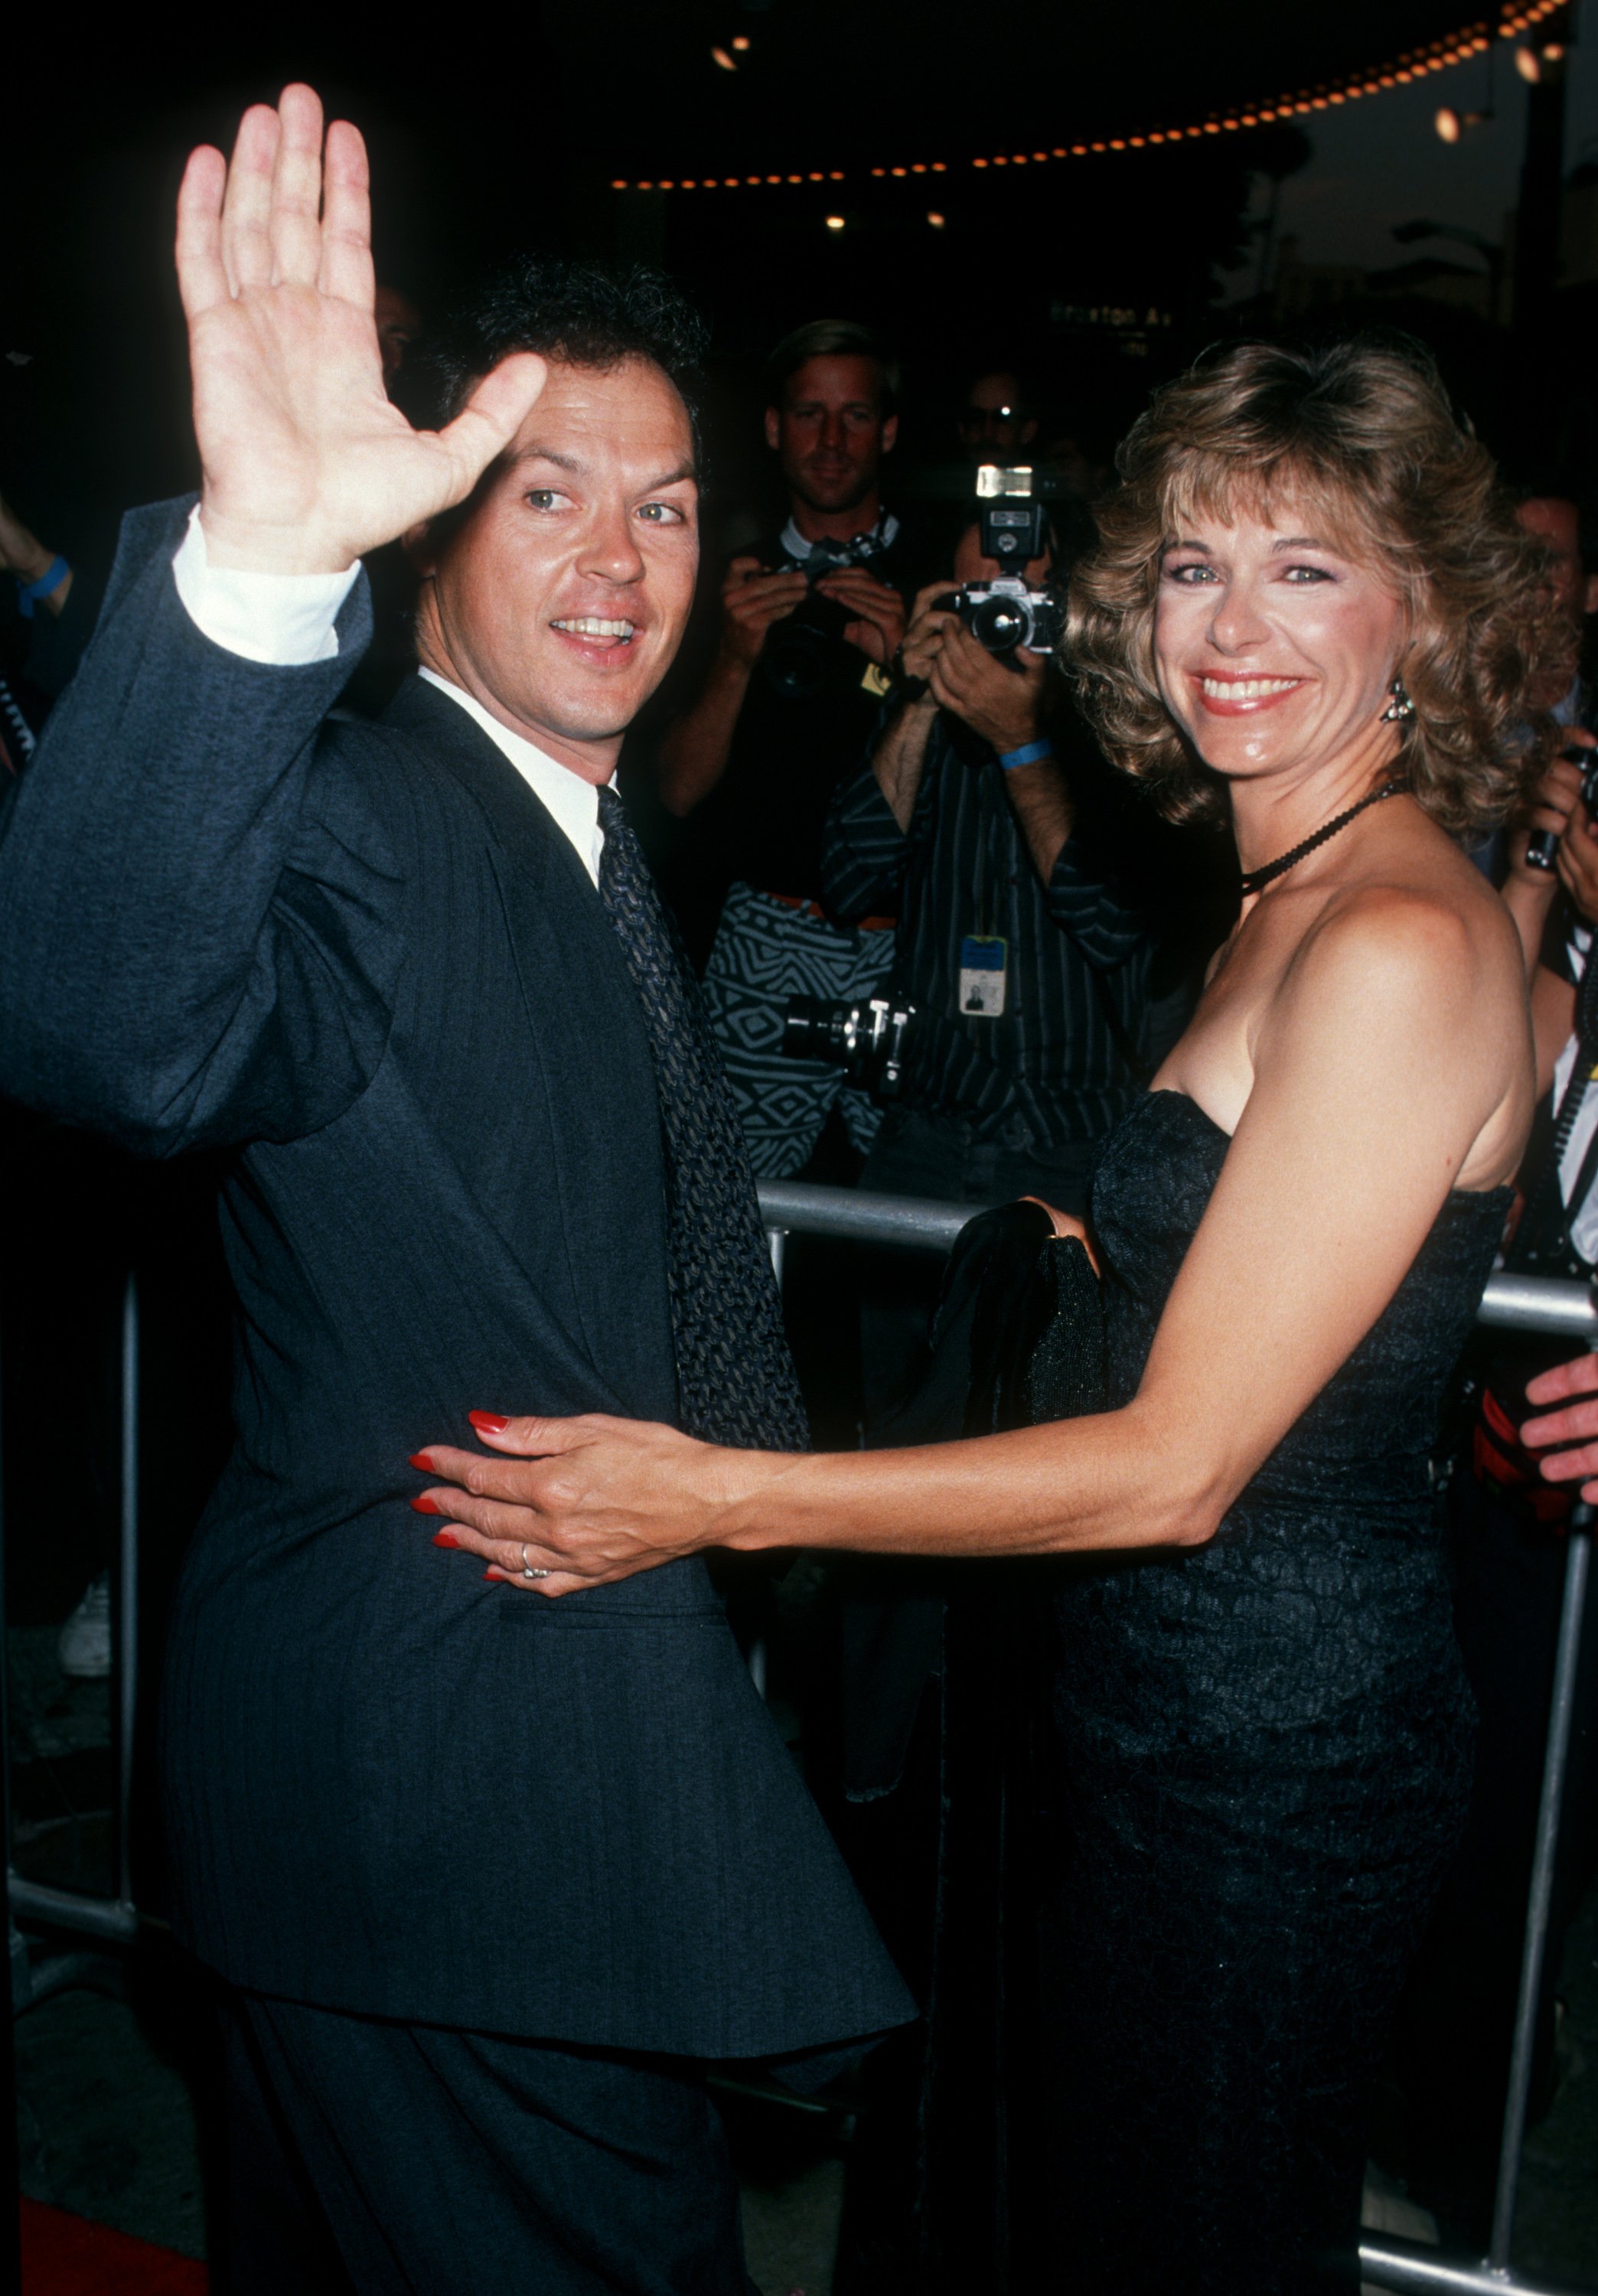 Michael Keaton and Caroline McWilliams at the premiere of "Batman" at Mann Bruin Theater in Westwood, California, on June 19, 1989. | Source: Getty Images